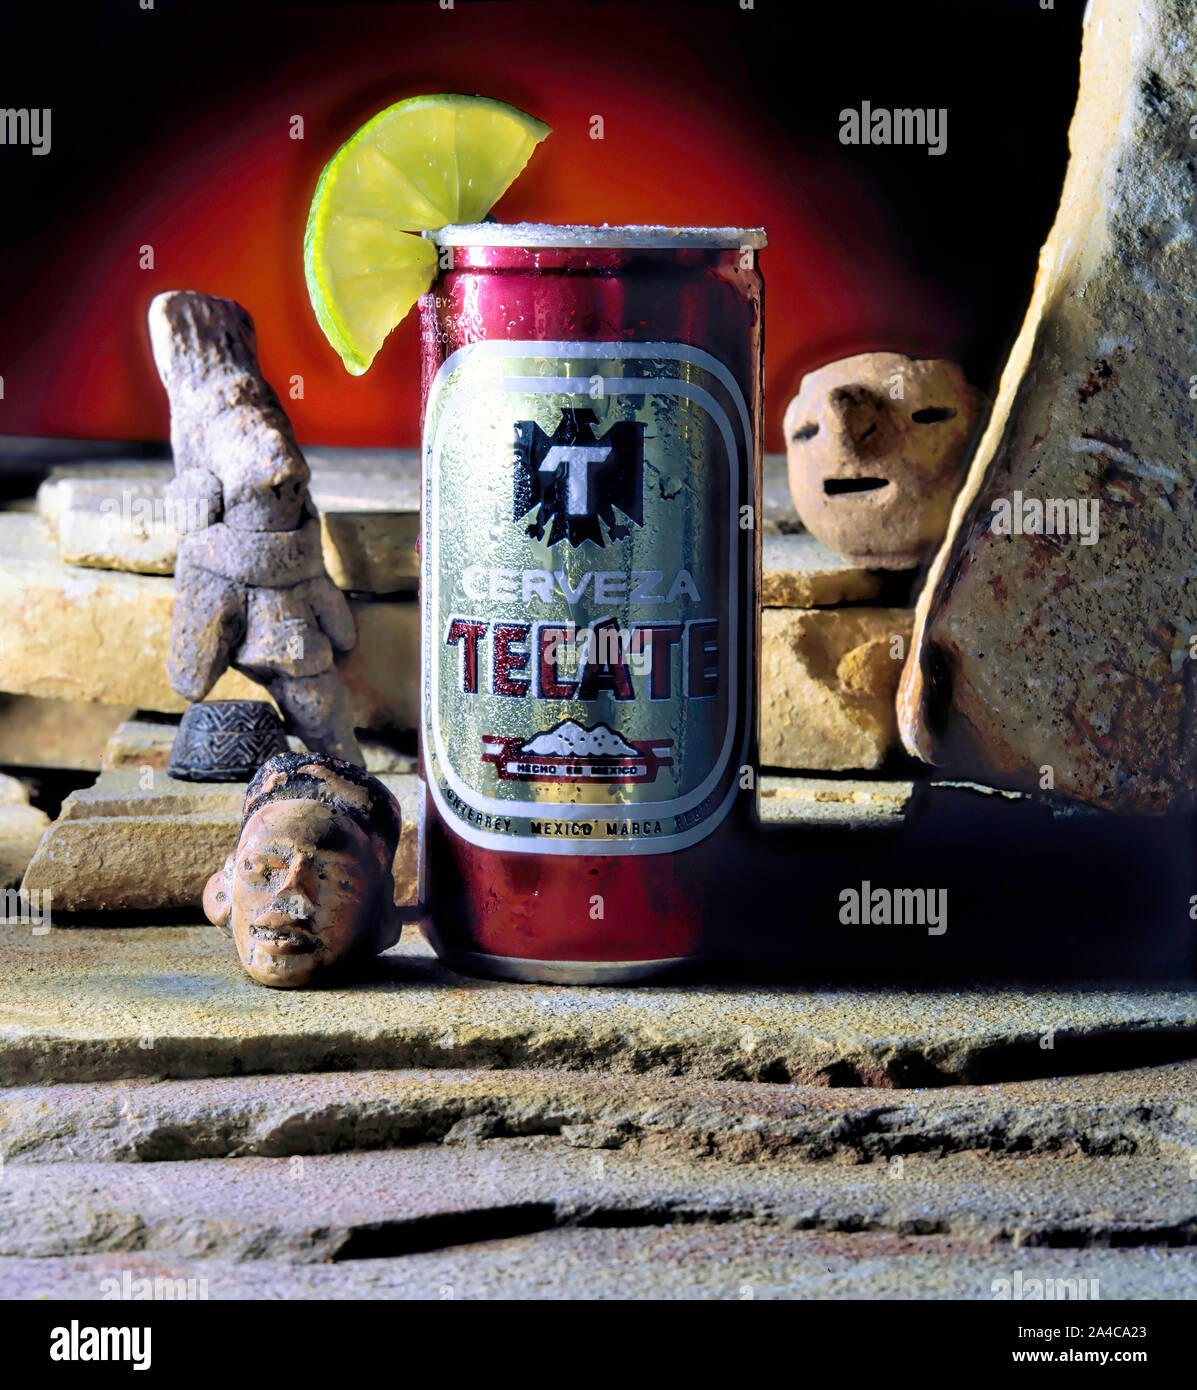 Dallas,Texas - Oct.13,2019 - Cold Tecate beer with Mexican Pre Columbian figures. Stock Photo